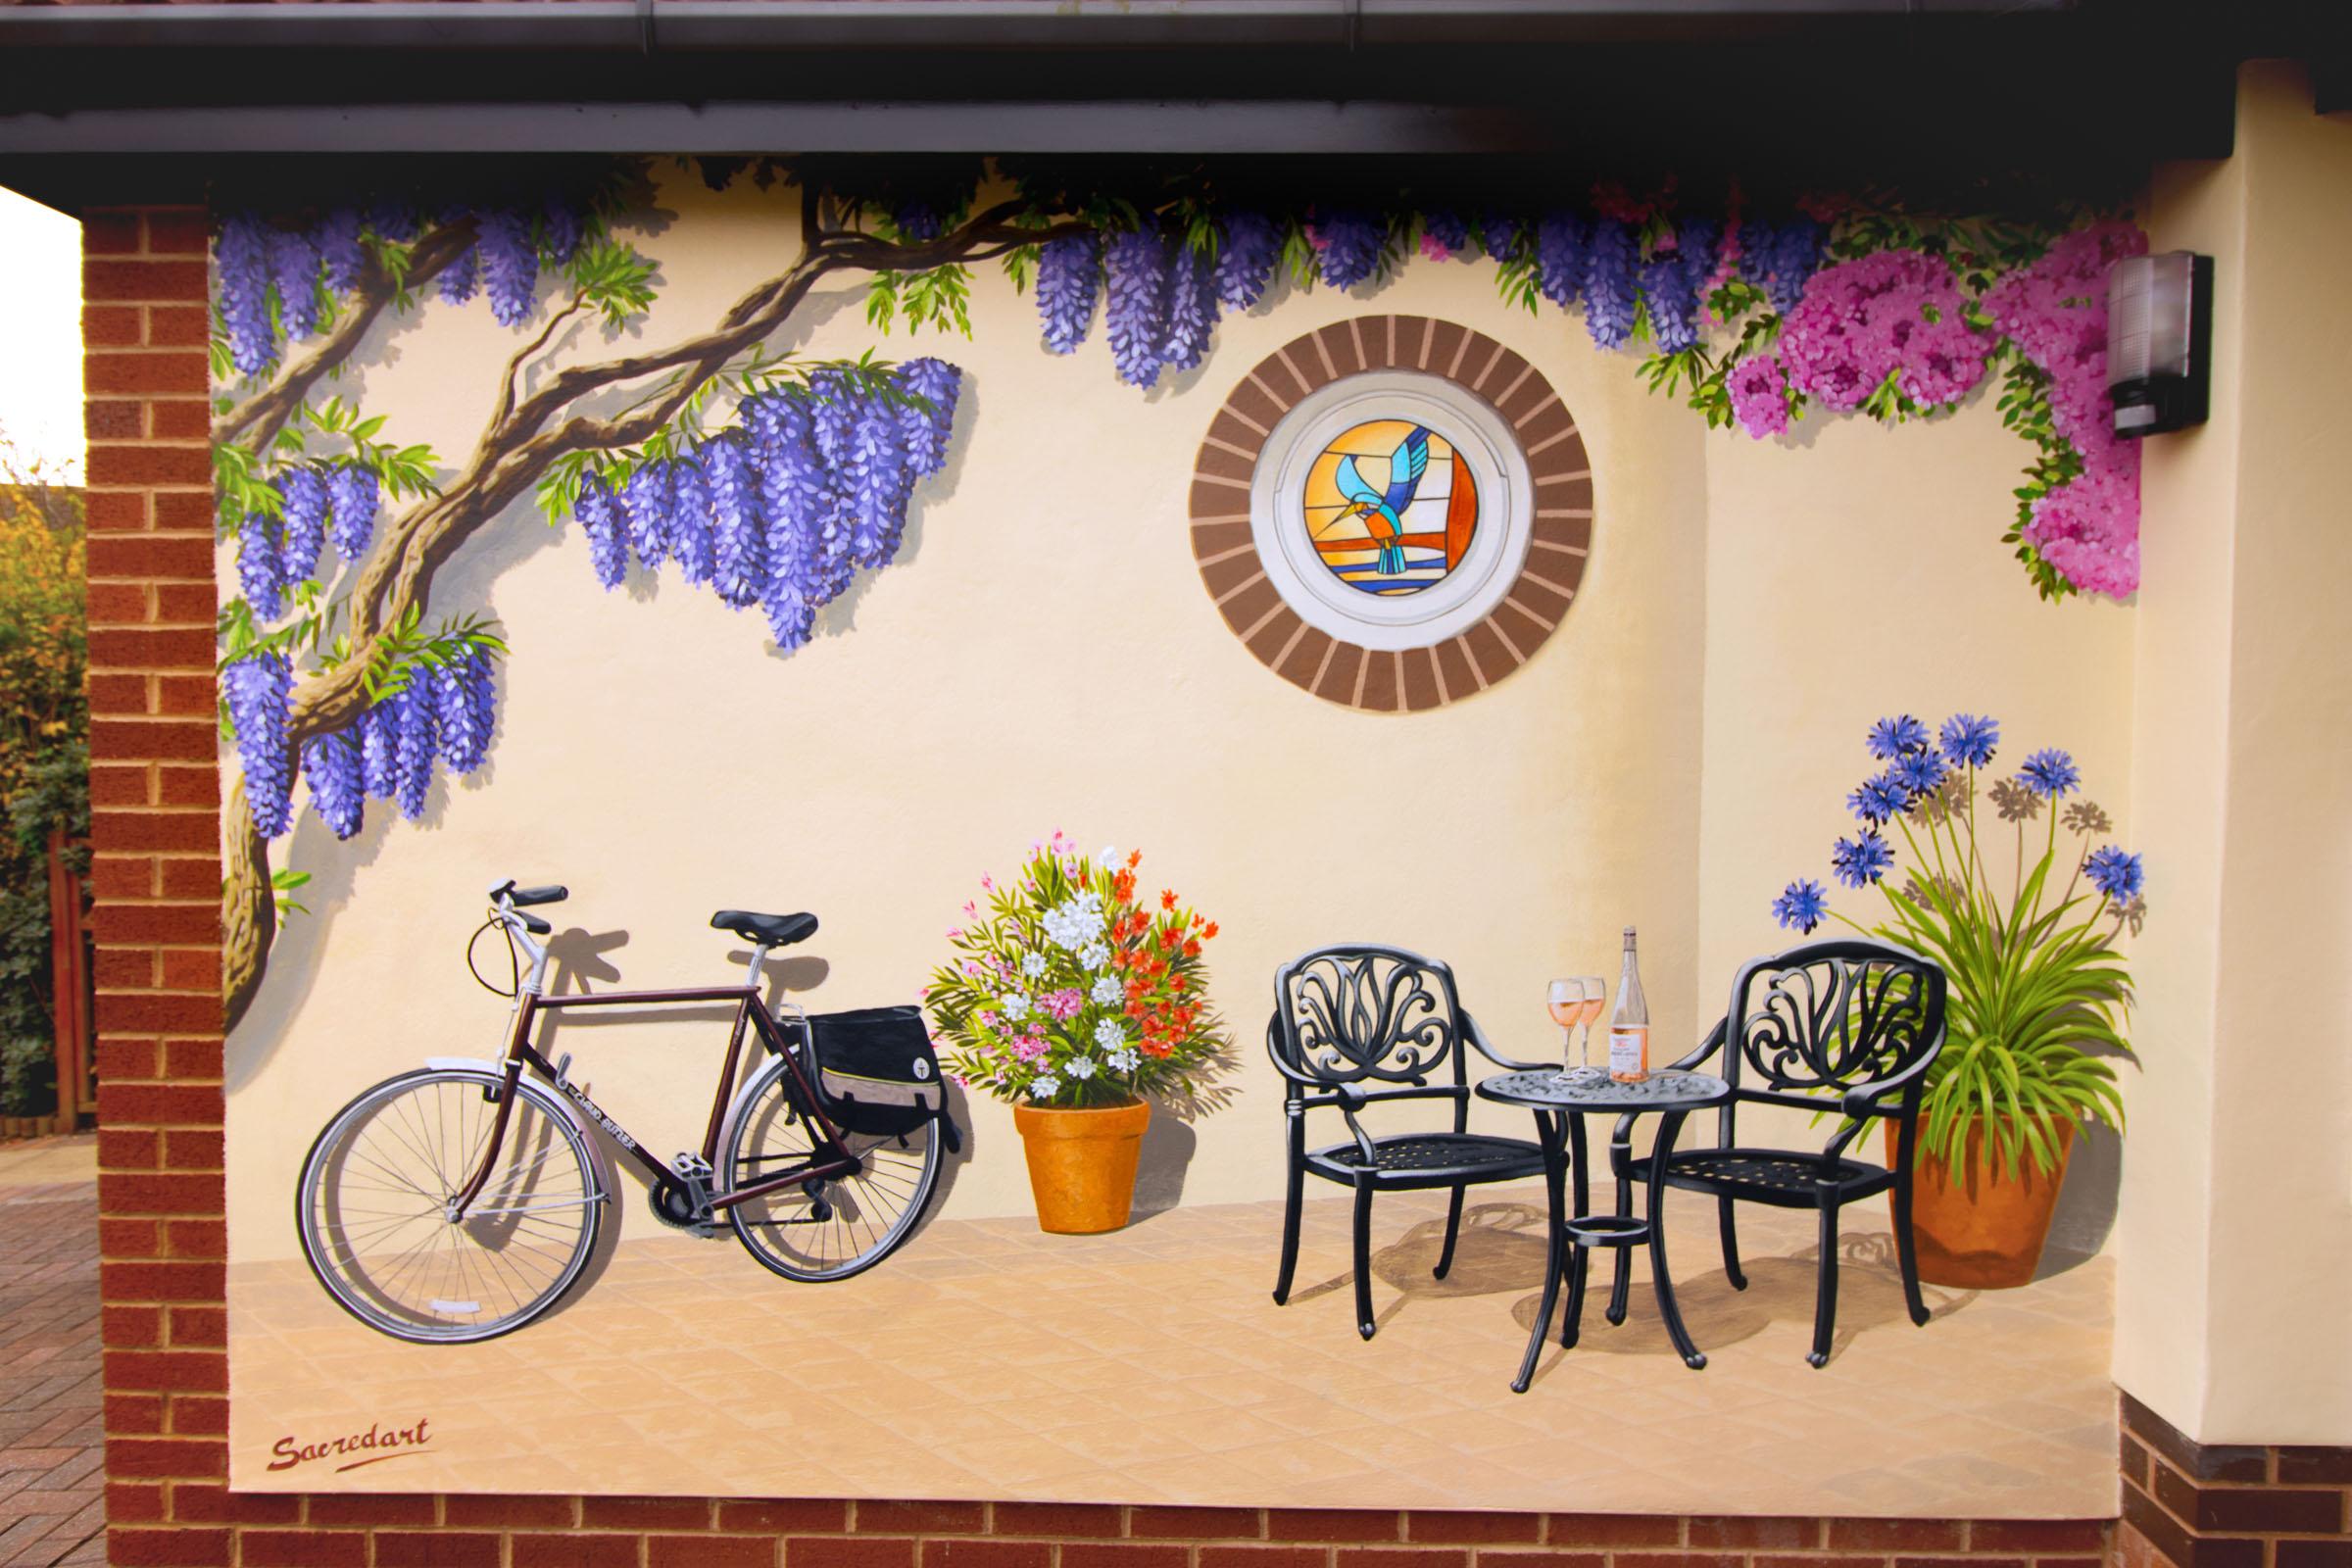 Memories of a cycling holiday destination in France brought home in this exterior mural painted on a garage wall